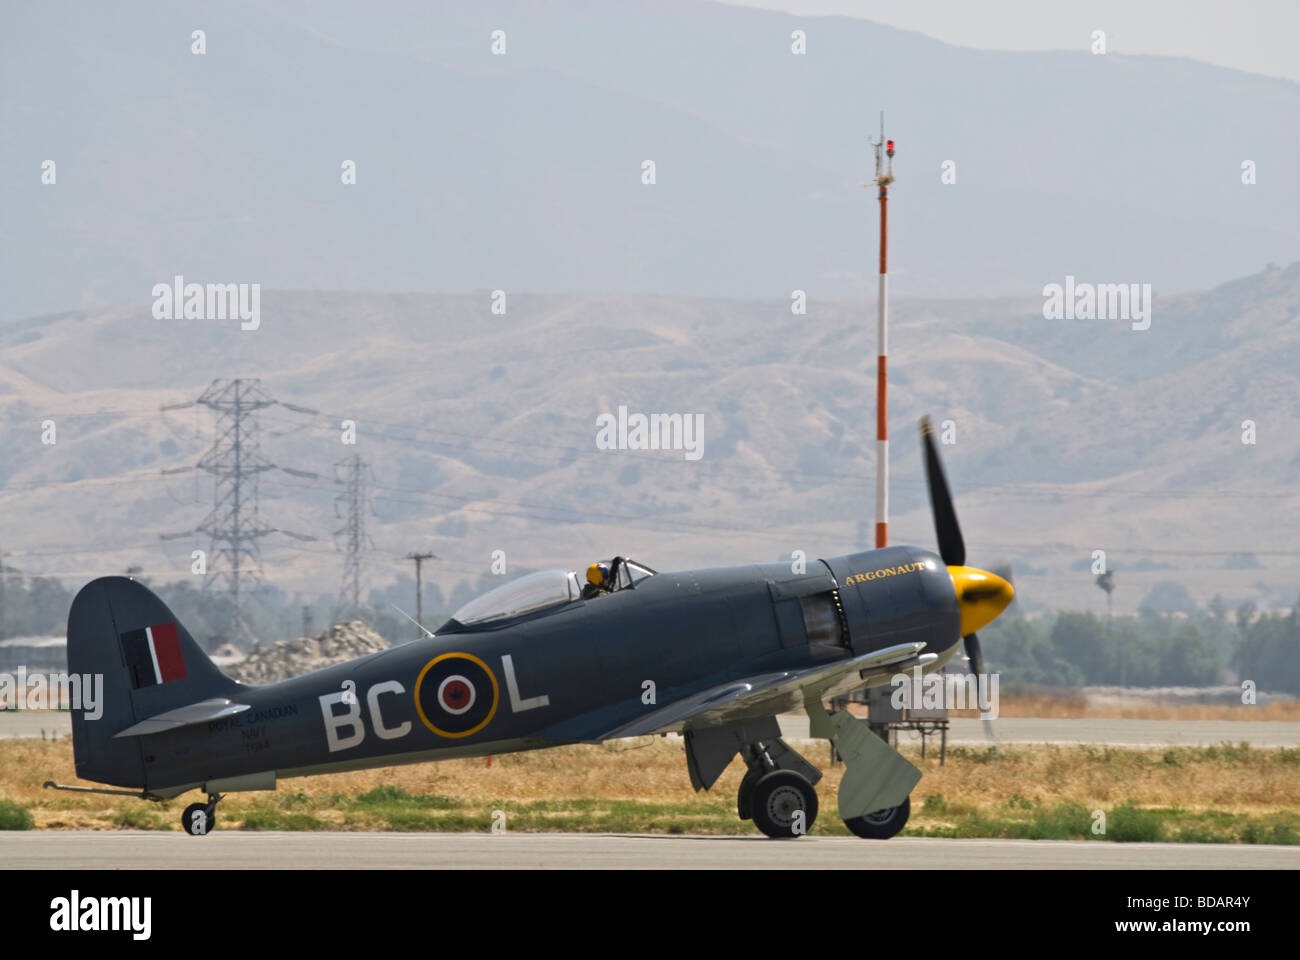 A Hawker Sea Fury taxis on the runway after flying at an air show. Stock Photo